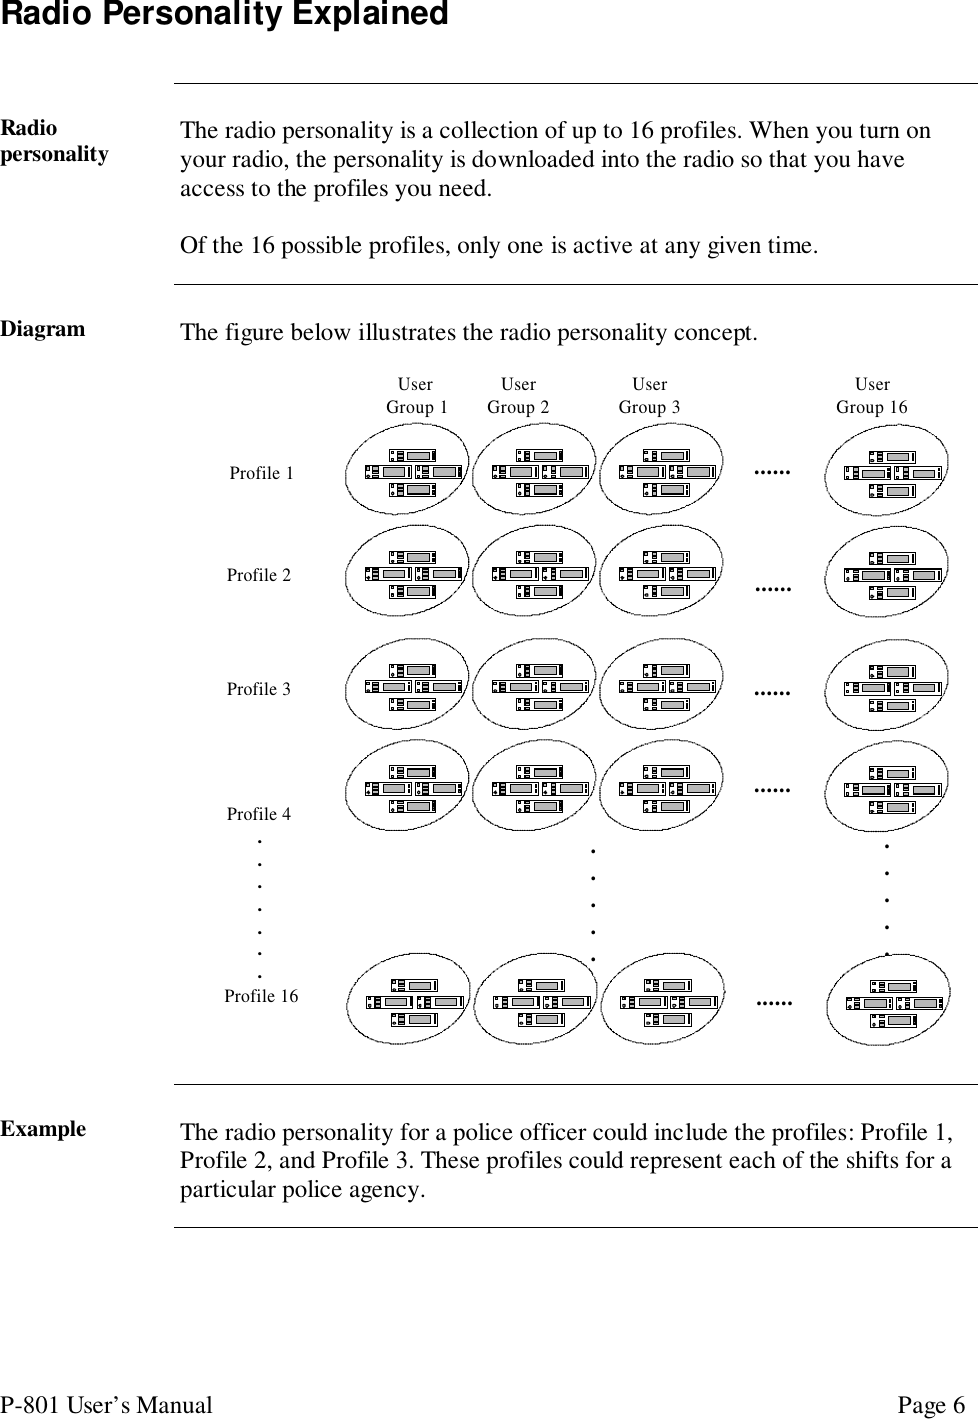 P-801 User’s Manual Page 6Radio Personality ExplainedRadiopersonality The radio personality is a collection of up to 16 profiles. When you turn onyour radio, the personality is downloaded into the radio so that you haveaccess to the profiles you need.Of the 16 possible profiles, only one is active at any given time.Diagram The figure below illustrates the radio personality concept. Profile 1Profile 2Profile 3Profile 4....... Profile 16..........User Group 1UserGroup 2UserGroup 3UserGroup 16..............................Example The radio personality for a police officer could include the profiles: Profile 1,Profile 2, and Profile 3. These profiles could represent each of the shifts for aparticular police agency.